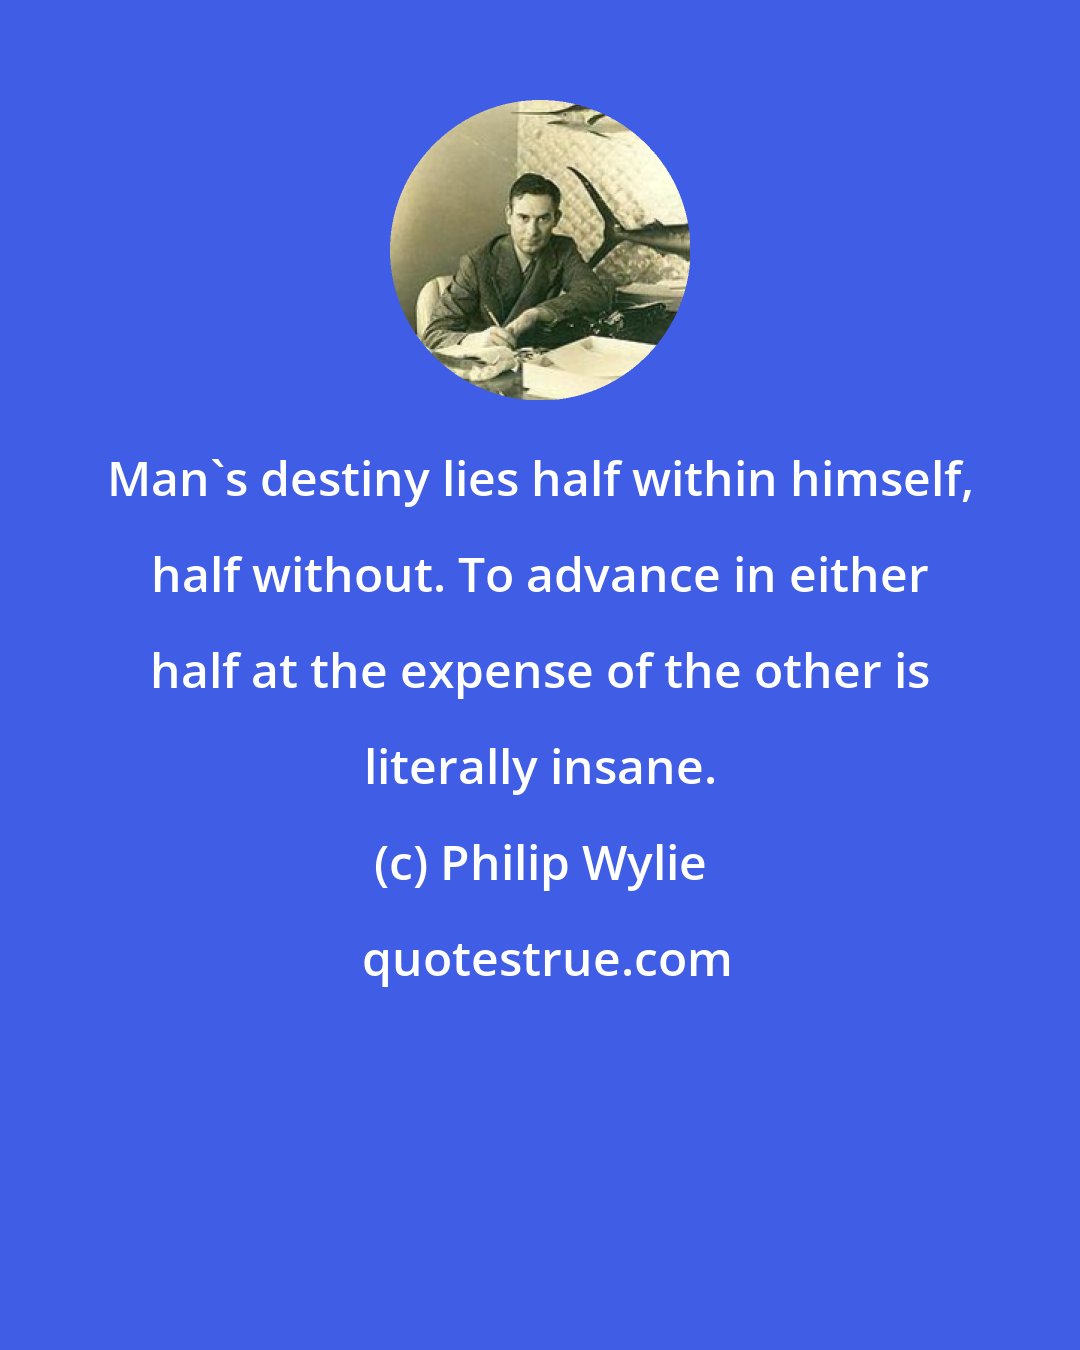 Philip Wylie: Man's destiny lies half within himself, half without. To advance in either half at the expense of the other is literally insane.